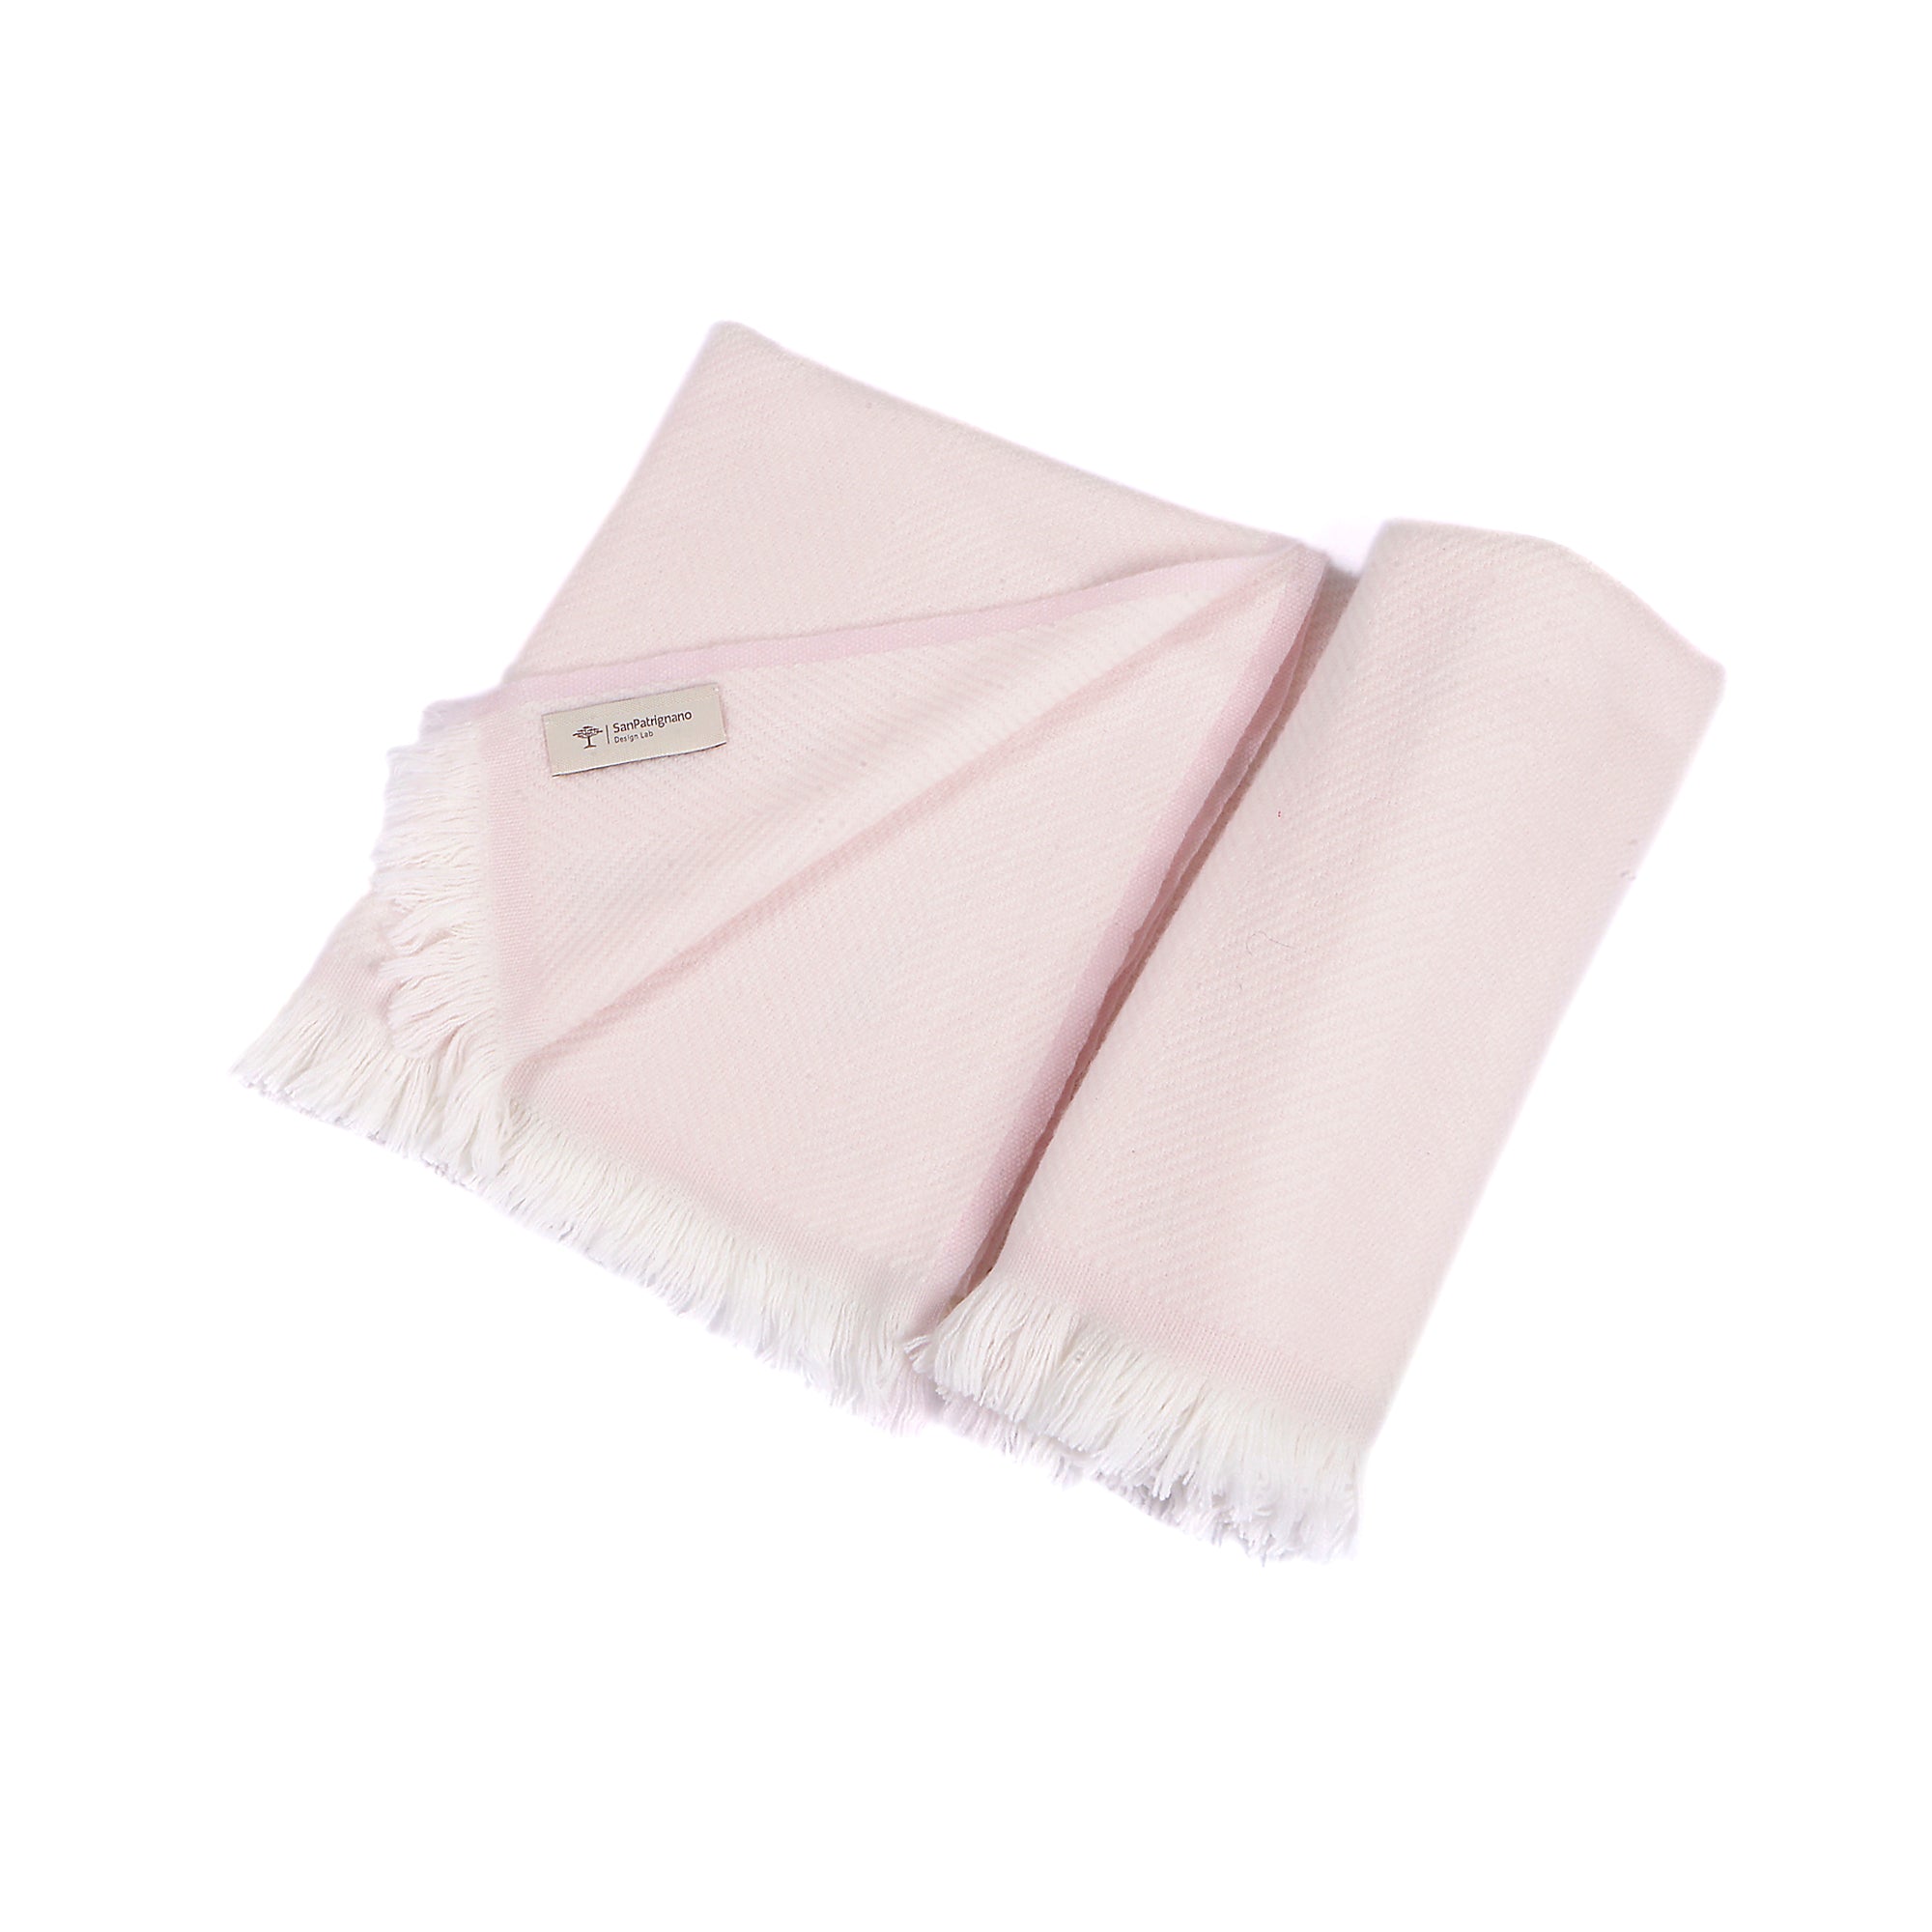 Cream and Soft Pink 100% Cashmere Baby Blanket with short fringes - Alternative view 1